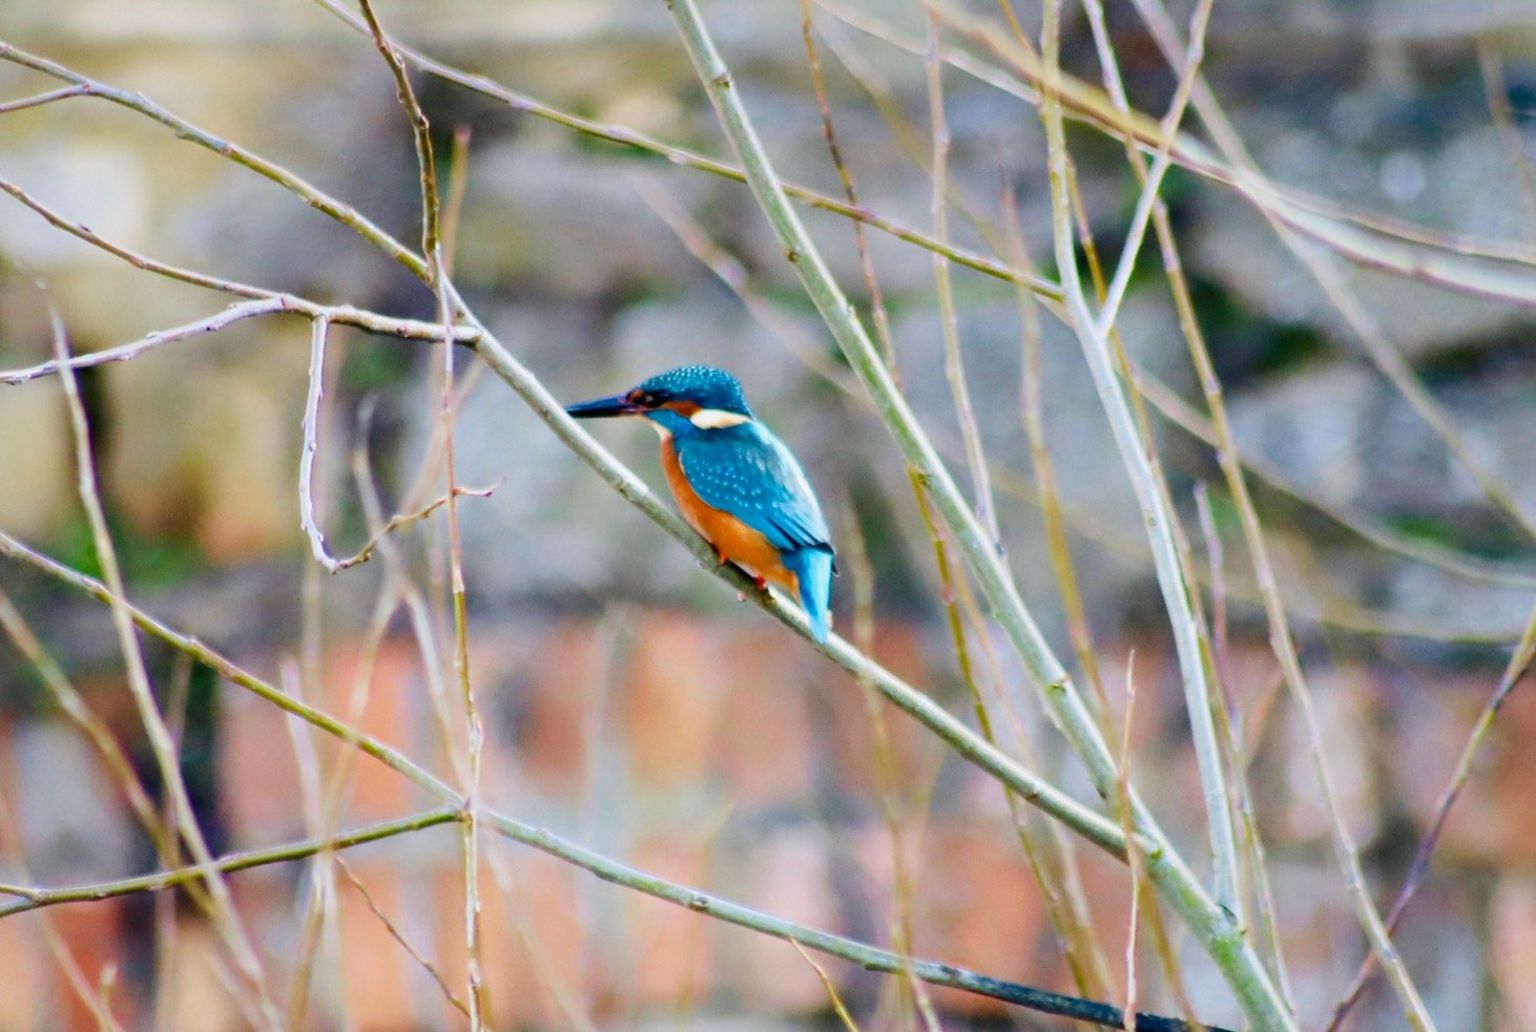 A kingfisher spotted in Abingdon